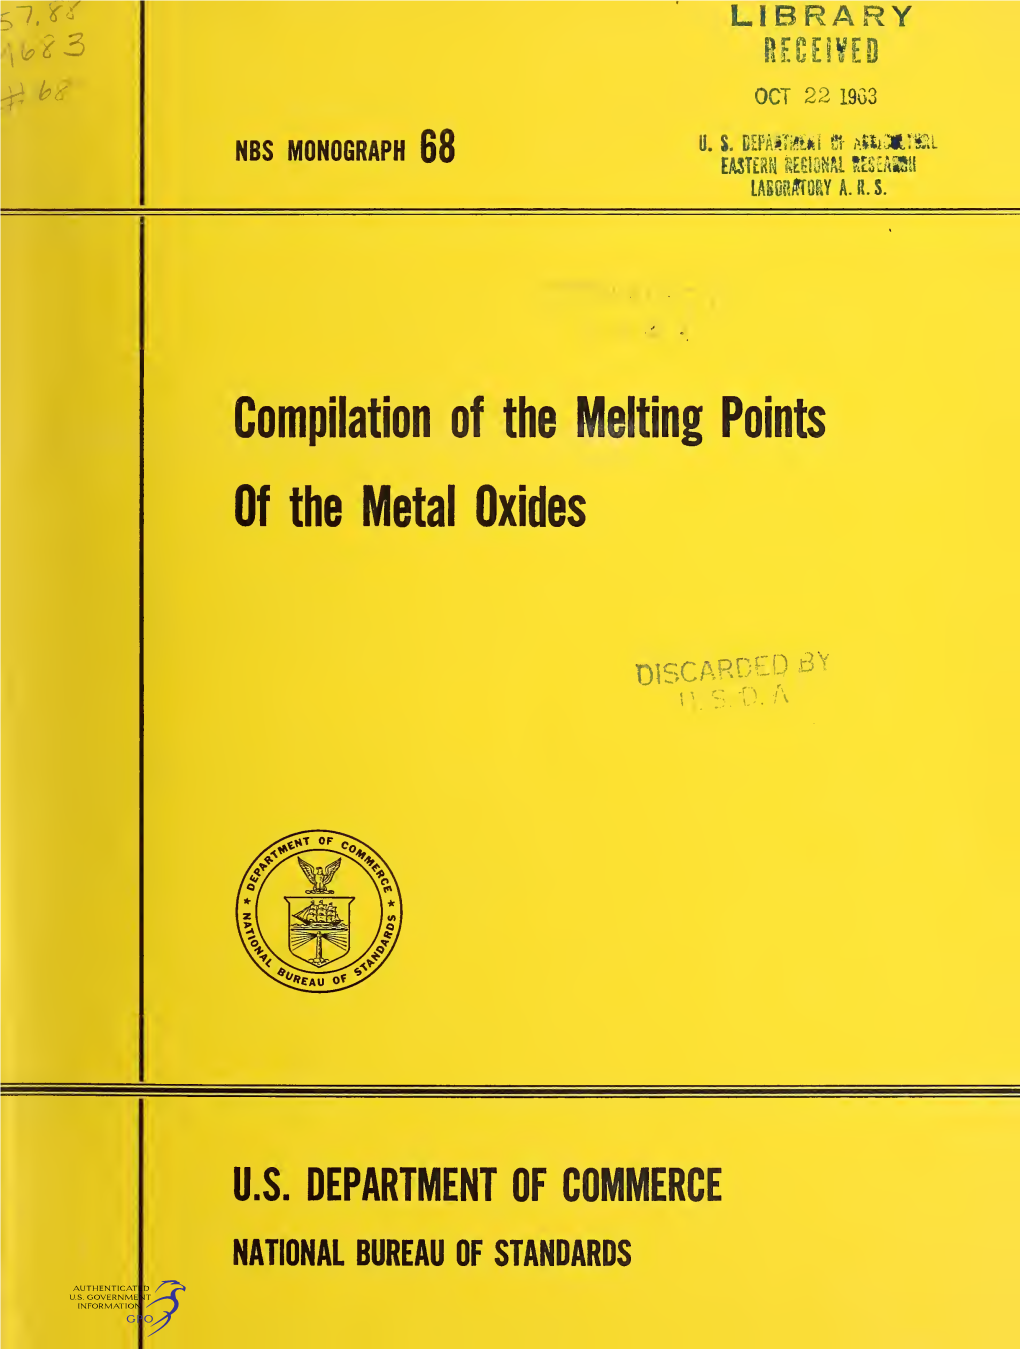 Compilation of the Melting Points of the Metal Oxides